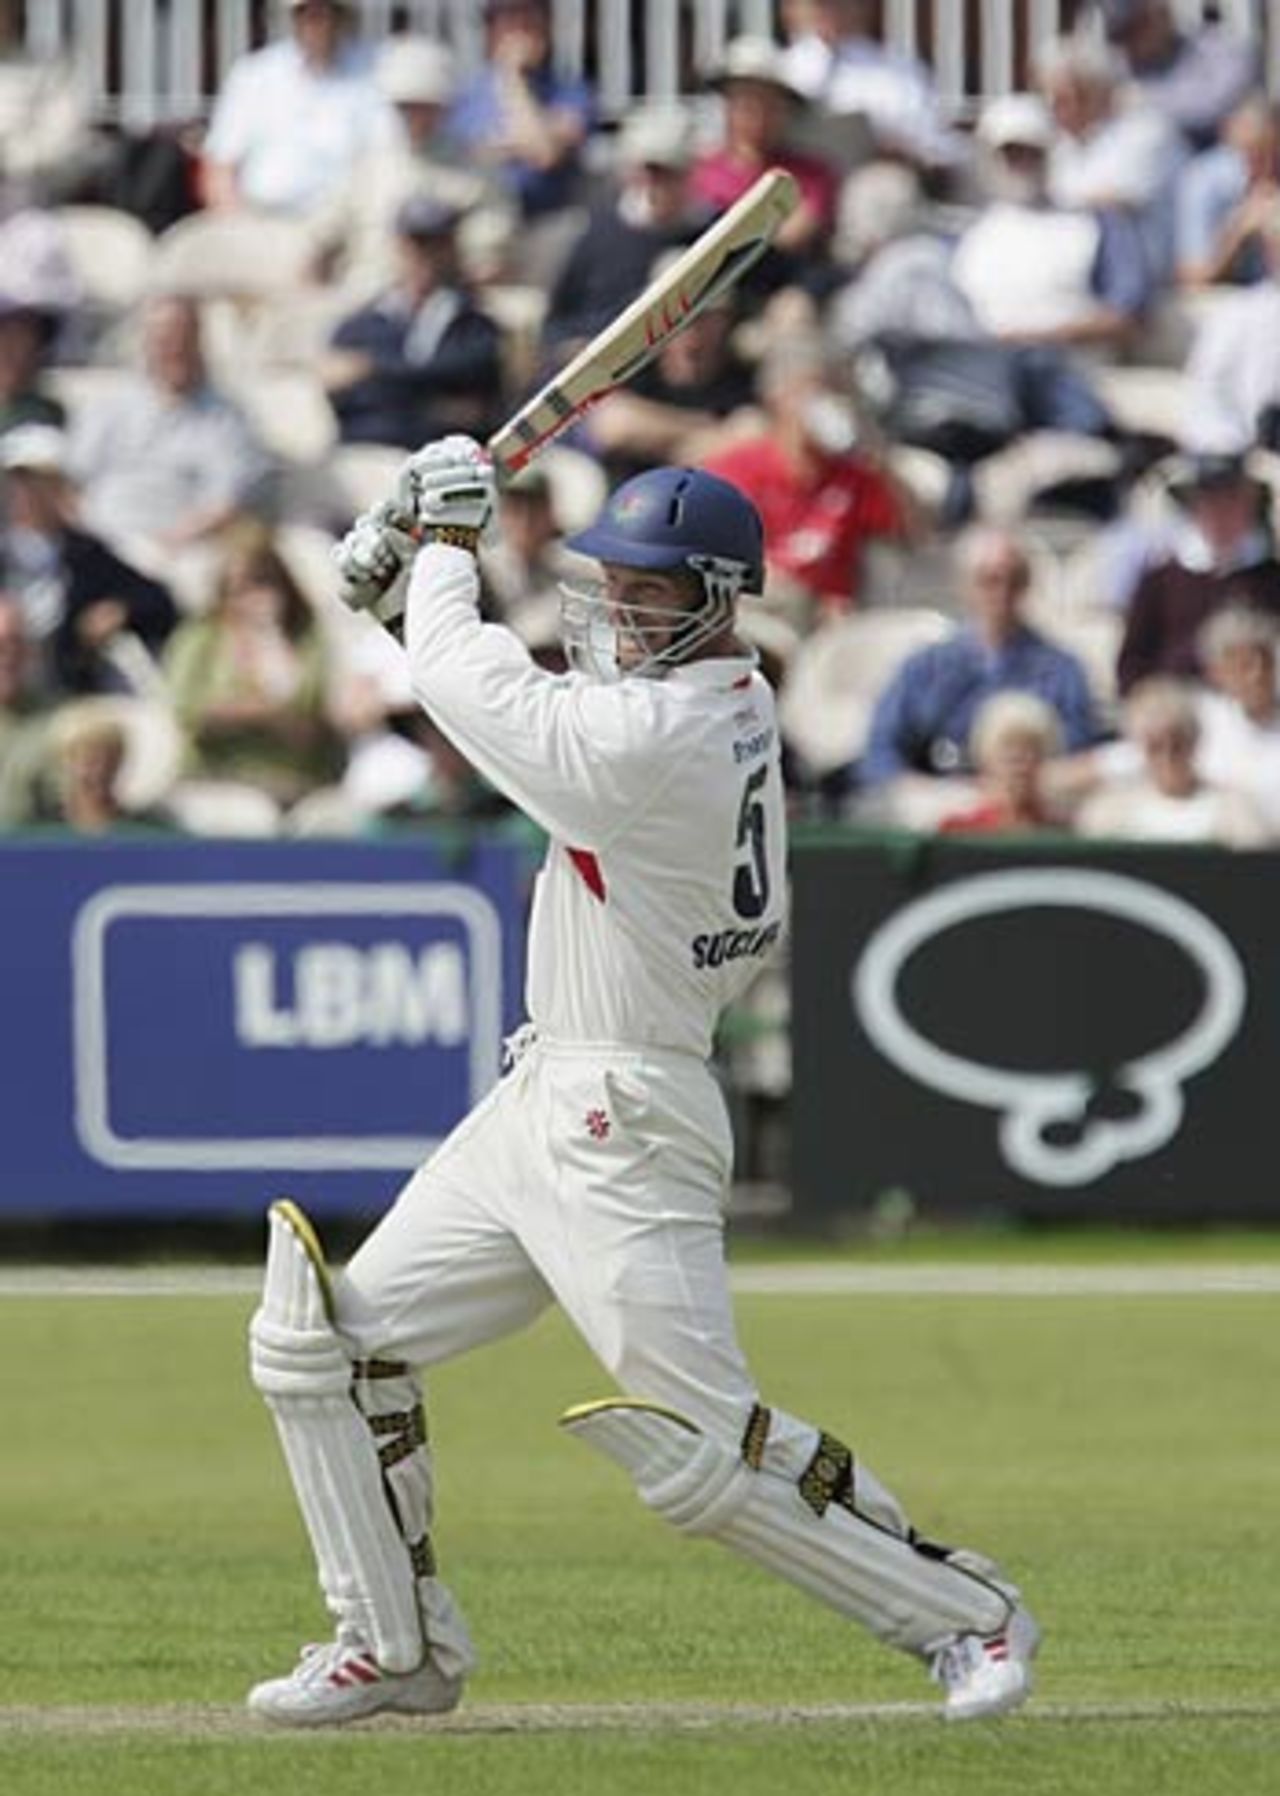 Iain Sutcliffe powers a booming drive, Lancashire v Nottinghamshire, County Championship, Old Trafford, May 25, 2006